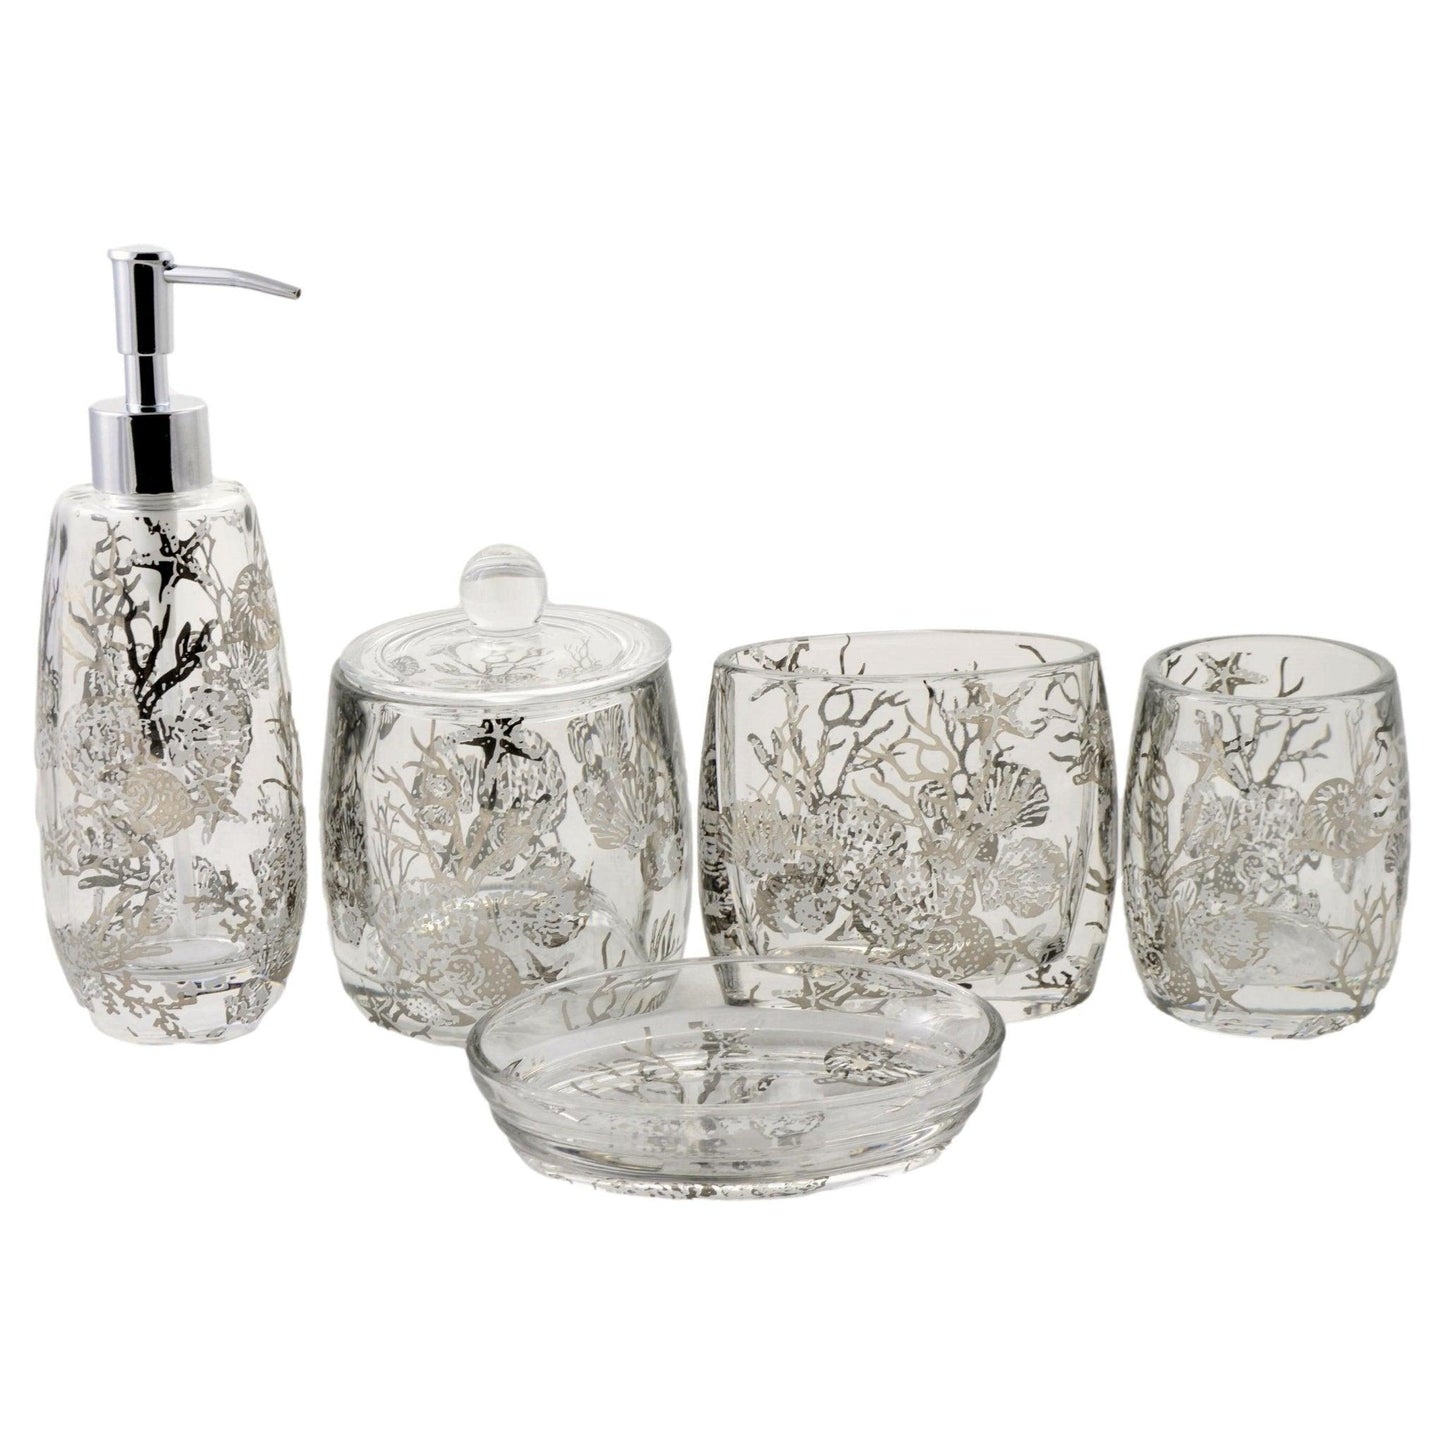 Bathroom Set of Glass in Antlers Design - Nature Home Decor